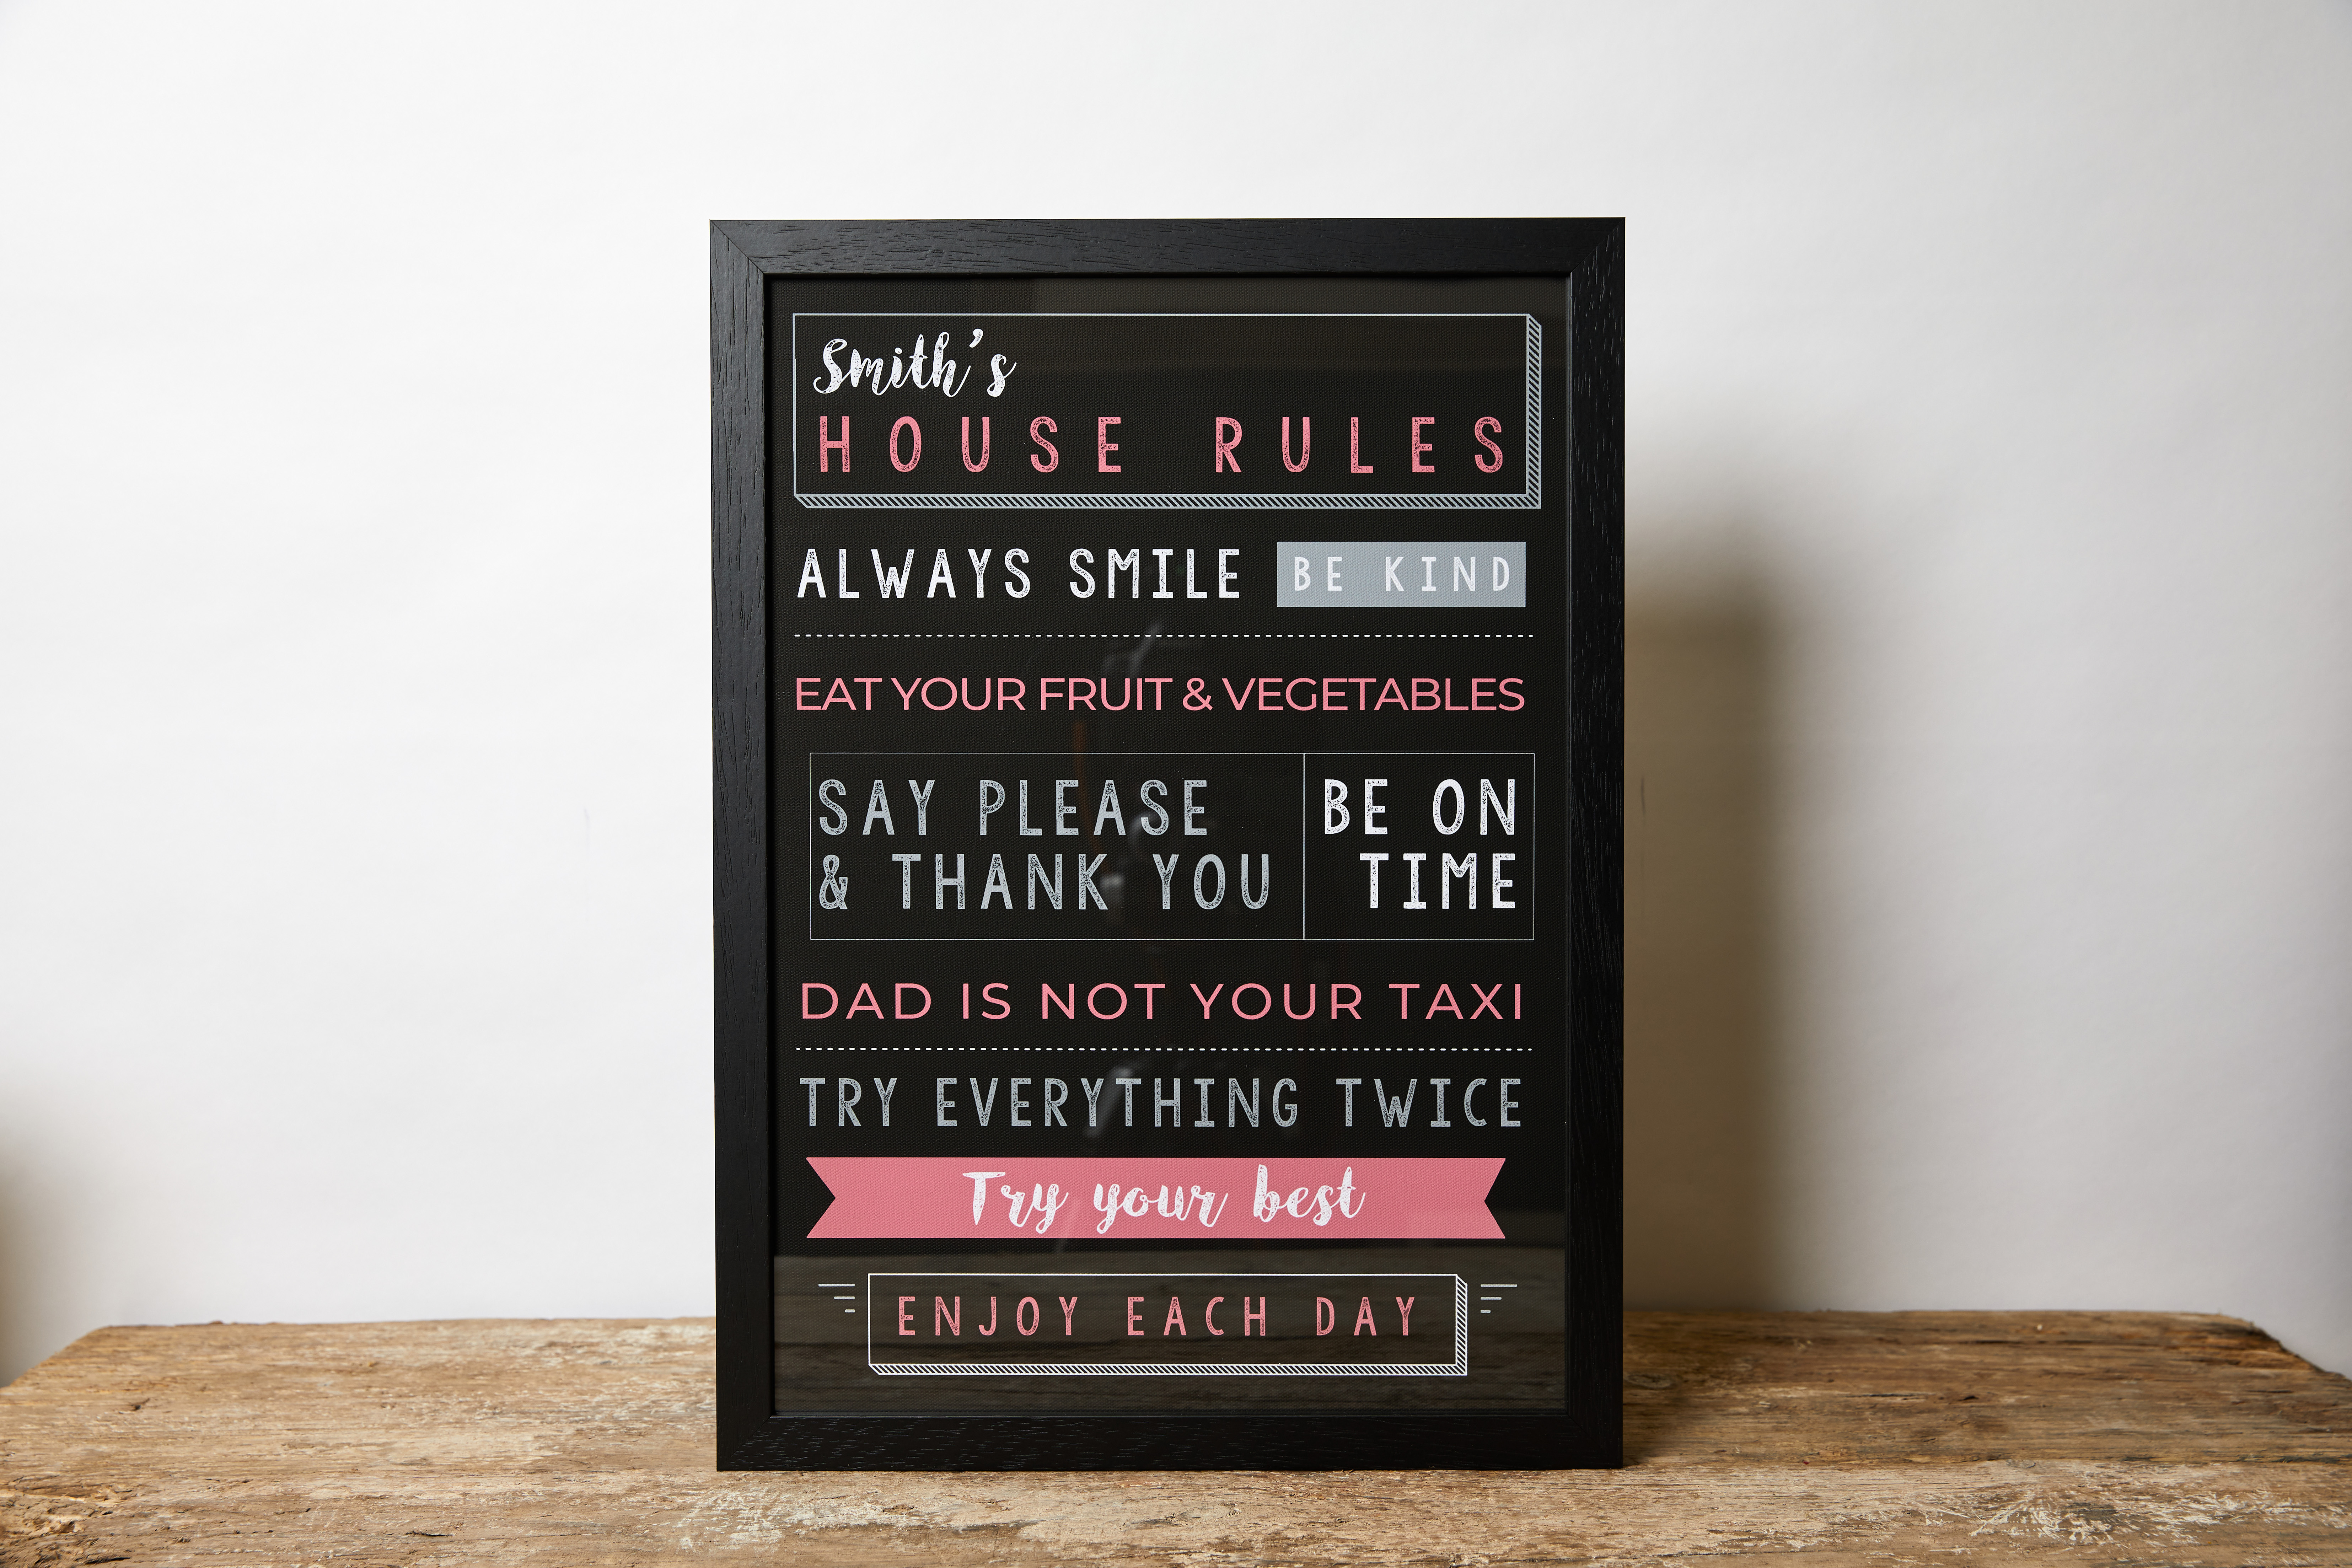 Create your own personalised word art list for your home and print it onto canvas, poster or frame your own custom list of house rules, things you are thankful for or create a list of things your friends and family love that would make the perfect gift!